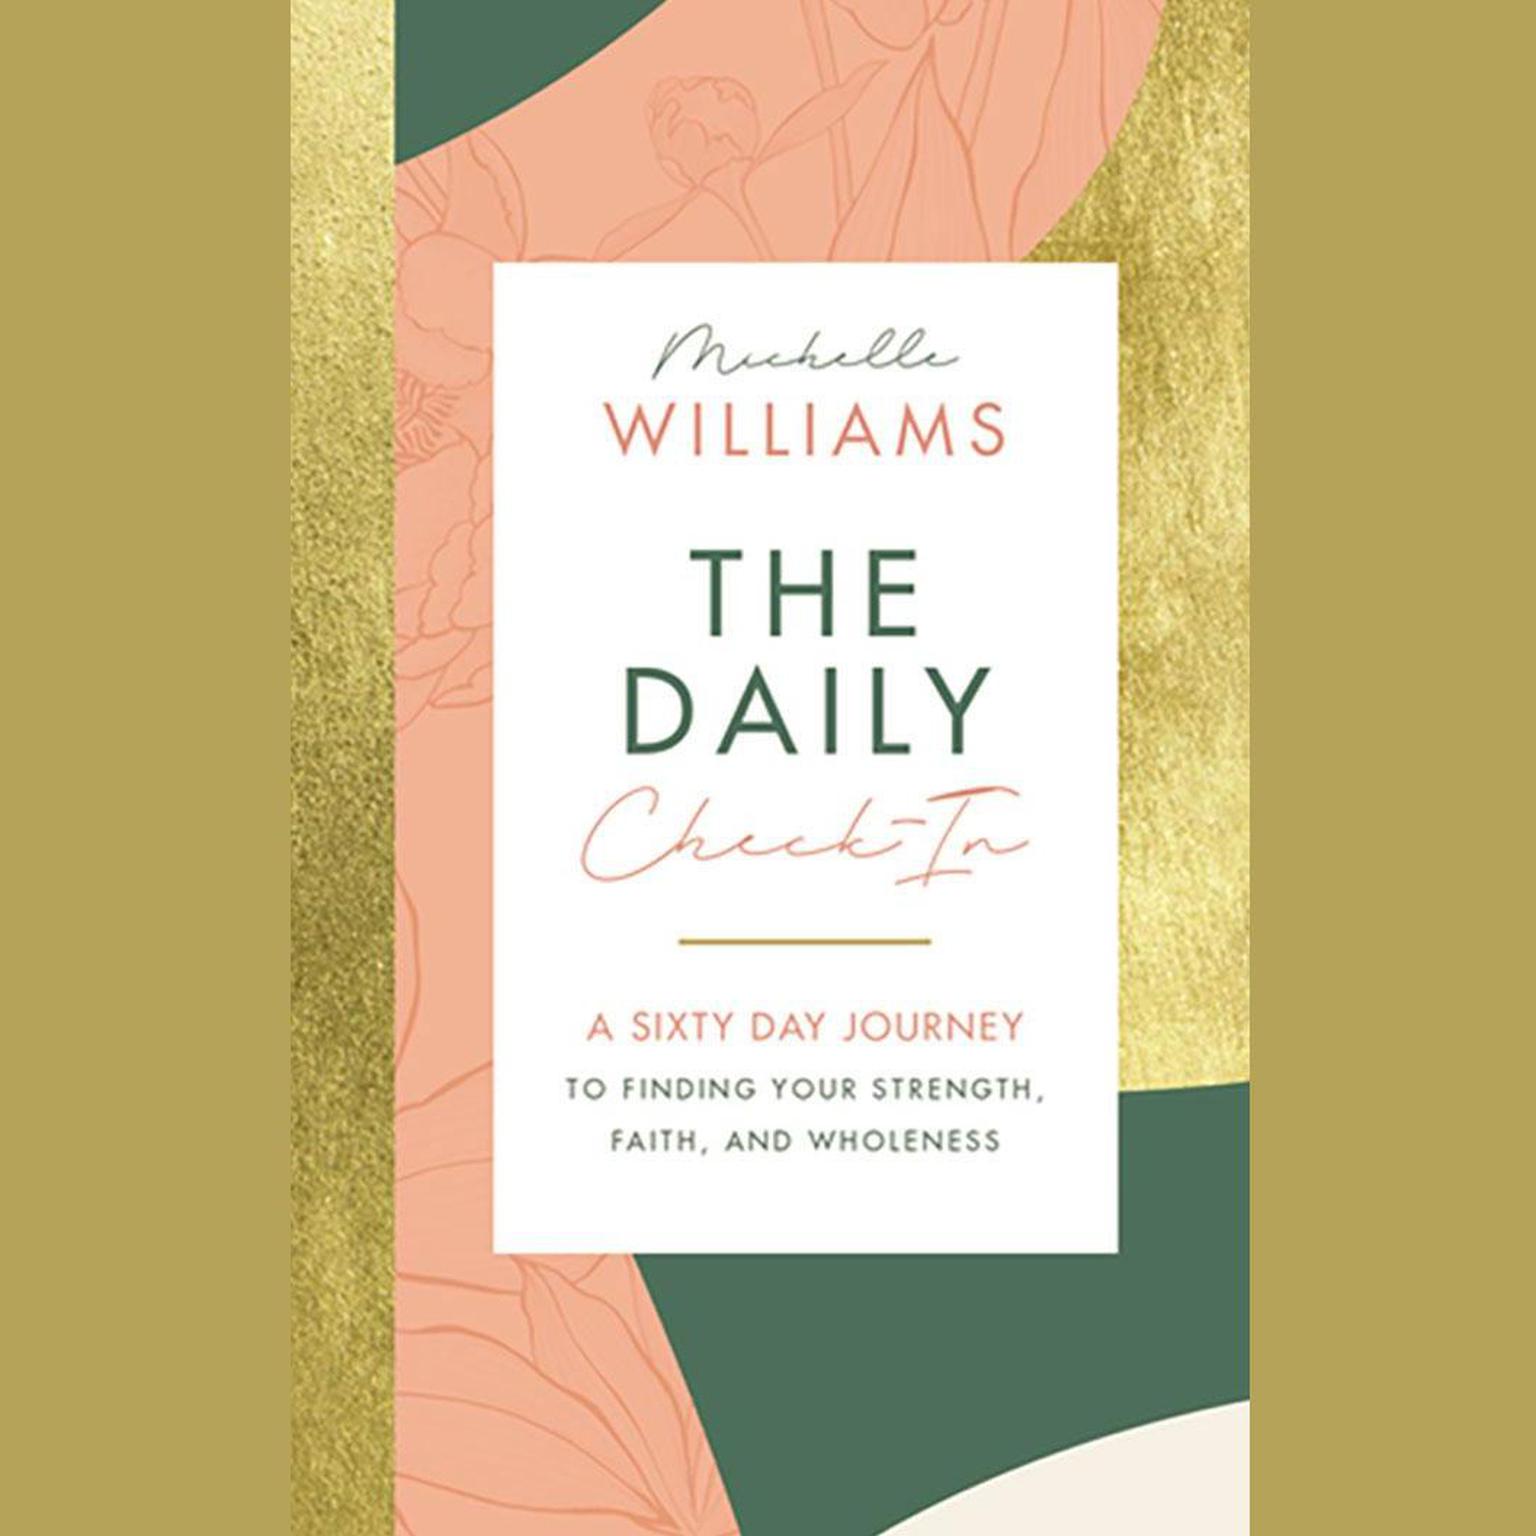 The Daily Check-In: A Sixty Day Journey to Finding Your Strength, Faith, and Wholeness Audiobook, by Michelle Williams